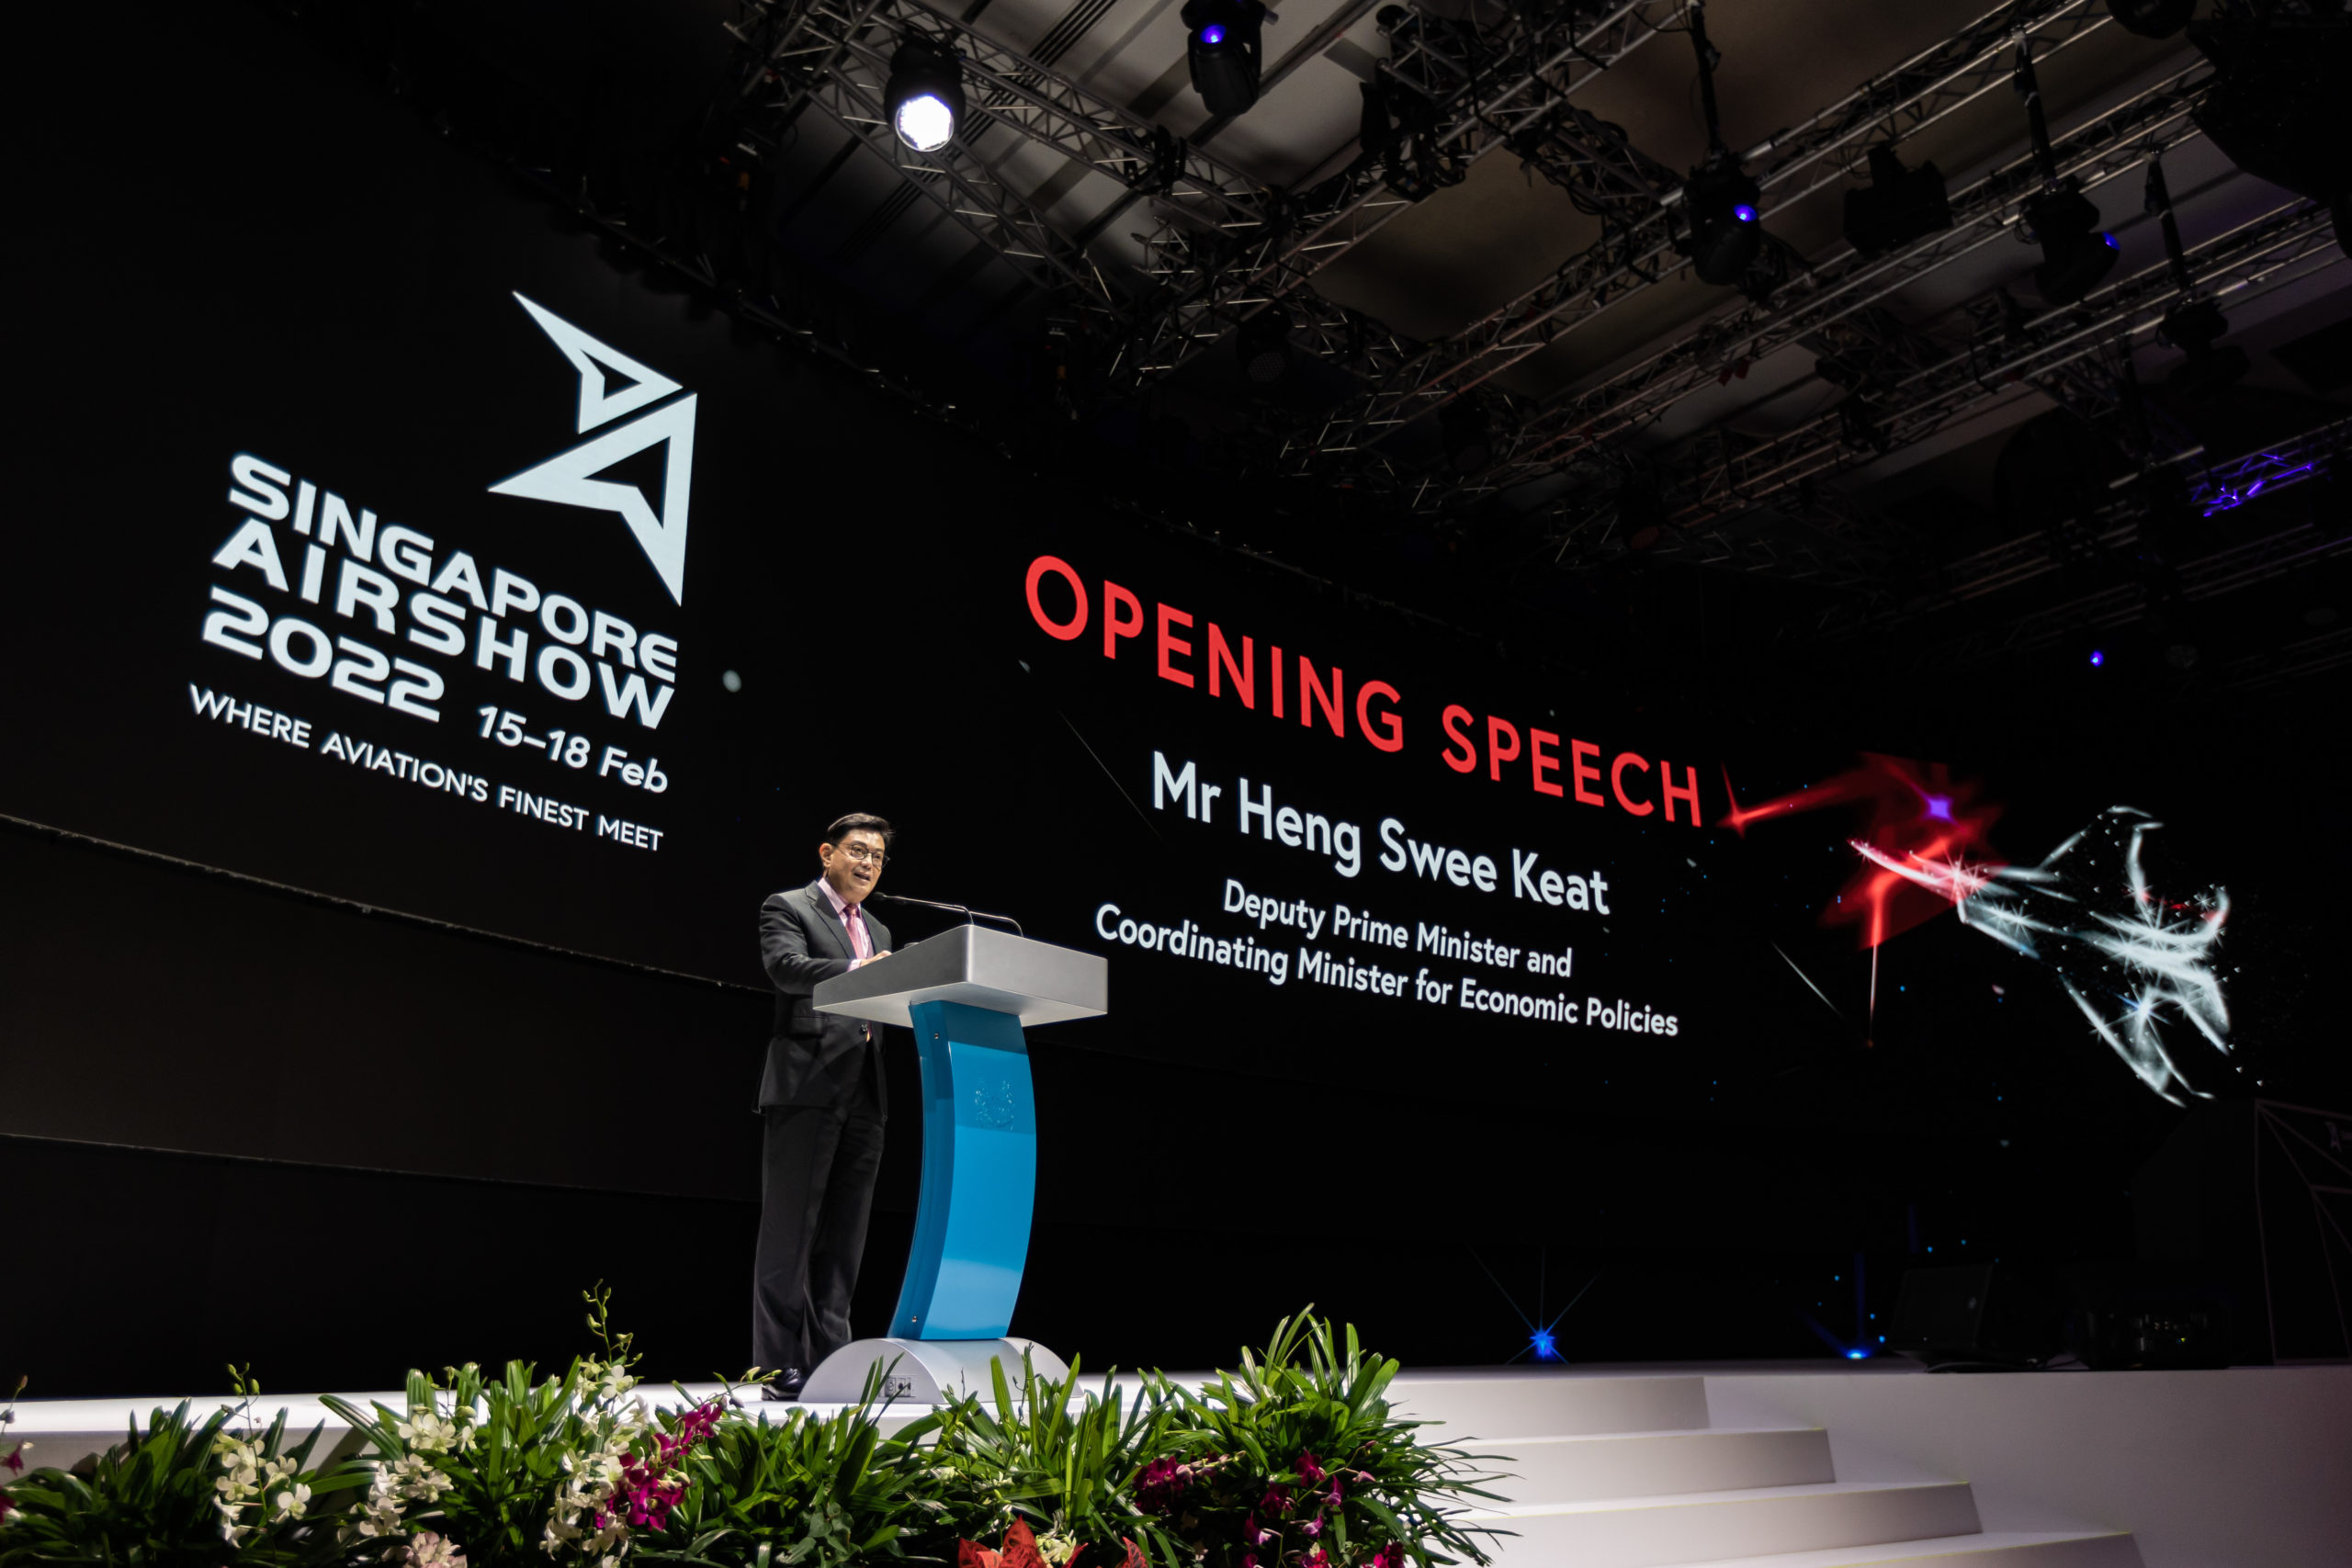 Singapore Deputy Prime Minister and Coordinating Minister for Economic Policies Mr Heng Swee Keat delivering the opening address at the Opening Ceremony of Singapore Airshow 2022. Photo: Singapore Airshow 2022